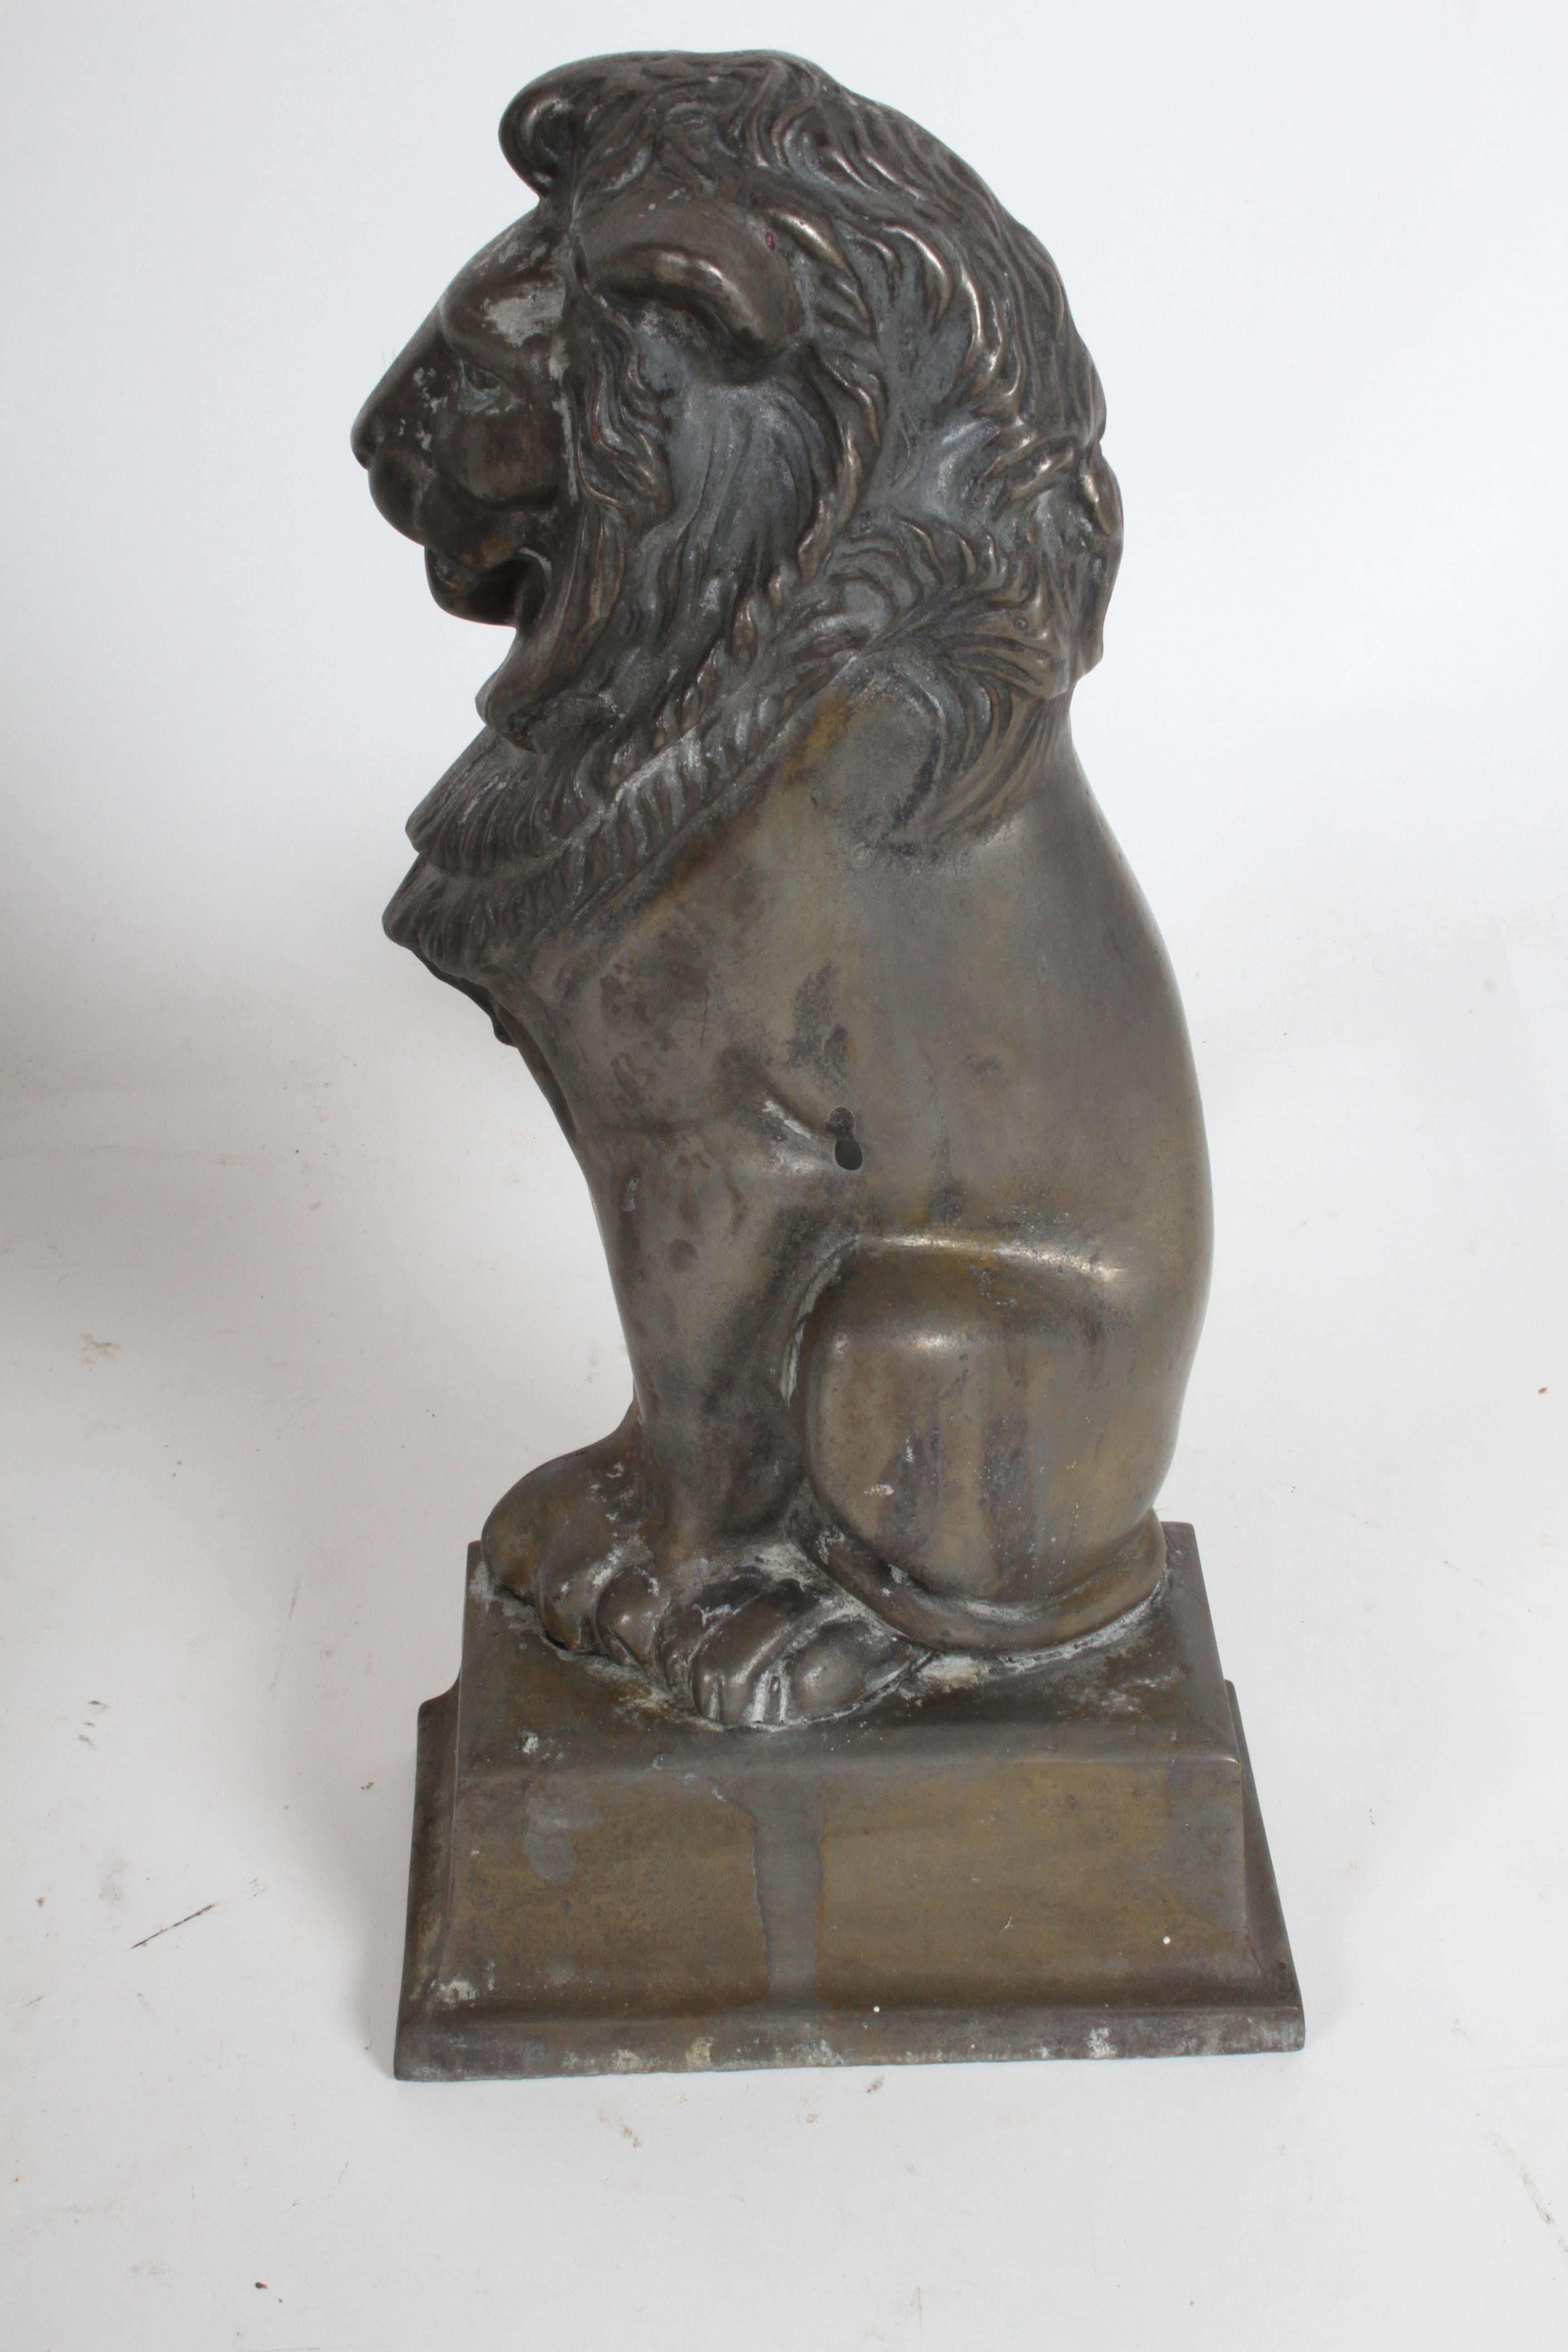 English Pair of Iron Andirons or Fire Dogs Modeled as Lions after Artist Alfred Stevens